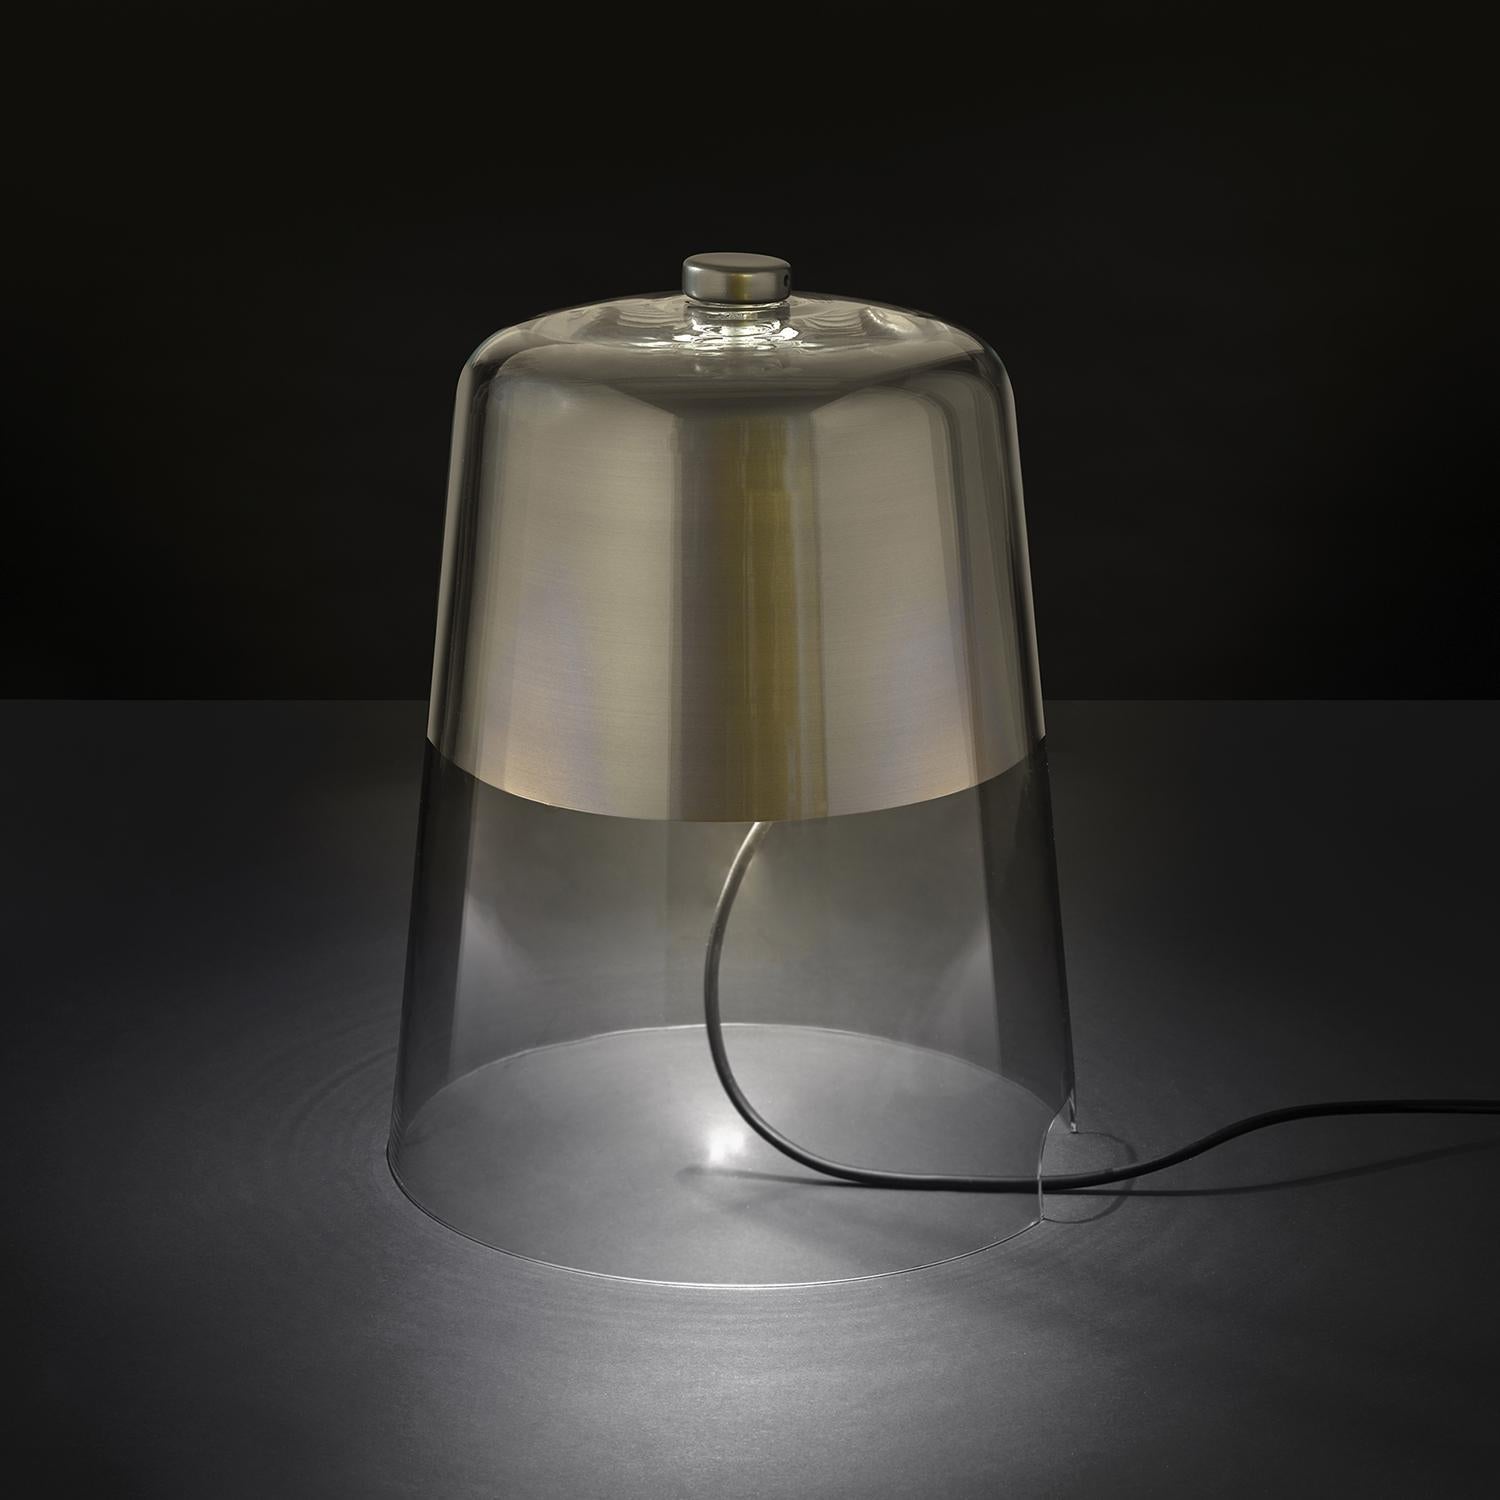 Table lamp 'Semplice' designed by Sam Hecht in 2013.
Able lamp giving reflected light in transparent blown glass. Turned internal aliminium reflector. ON/OFF power control with knob on top of the glass.
Manufactured by Oluce, Italy.

Sam Hecht